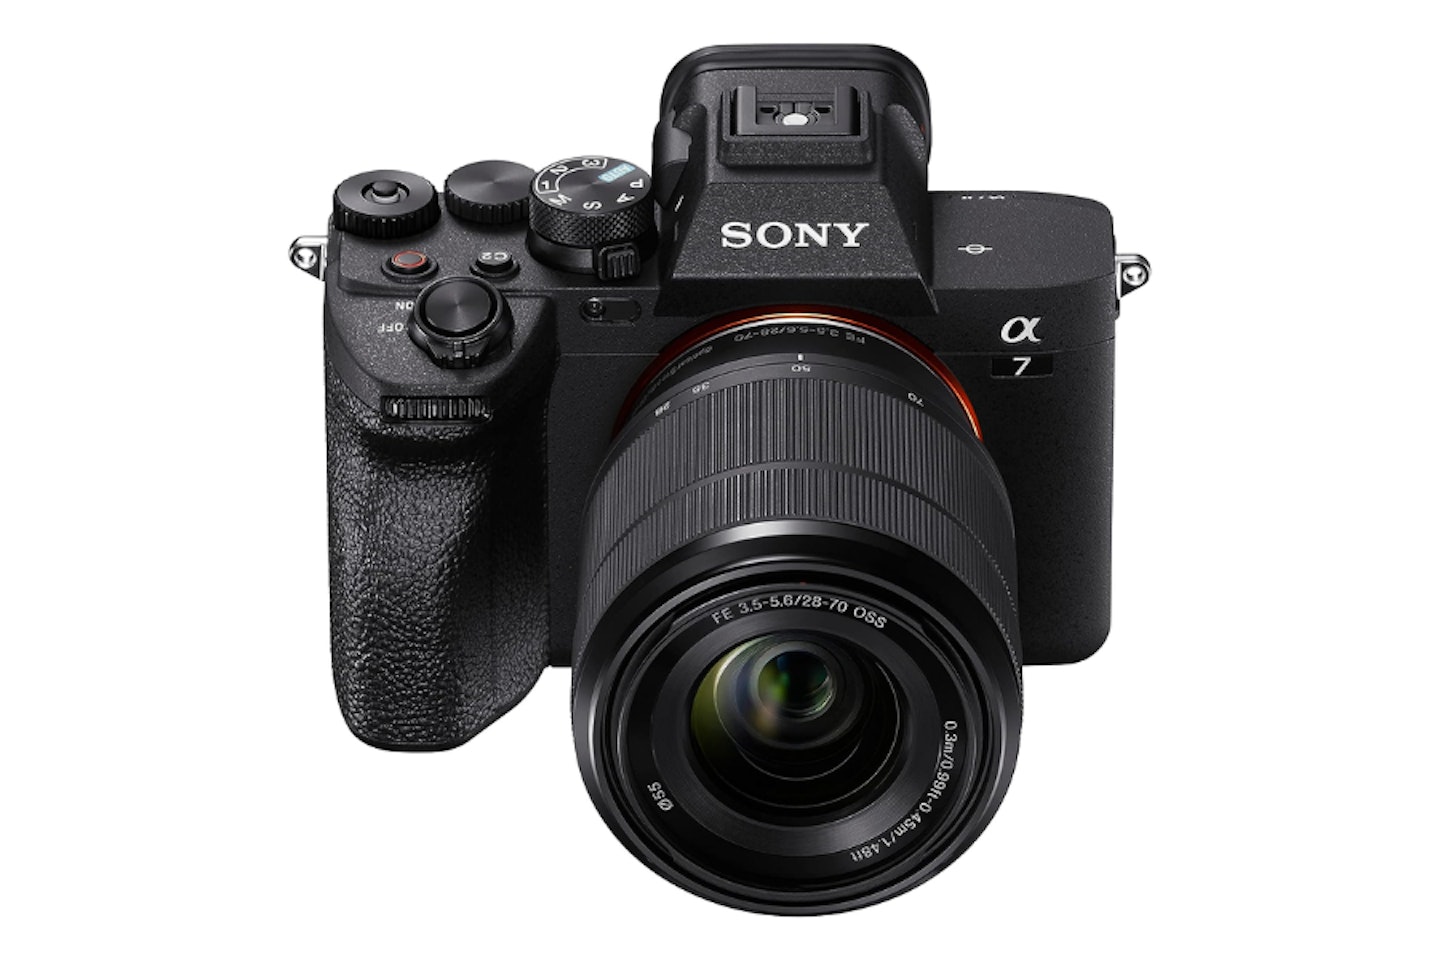 Sony Alpha 7 IV Full-Frame Mirrorless Camera - one of the best mirrorless cameras